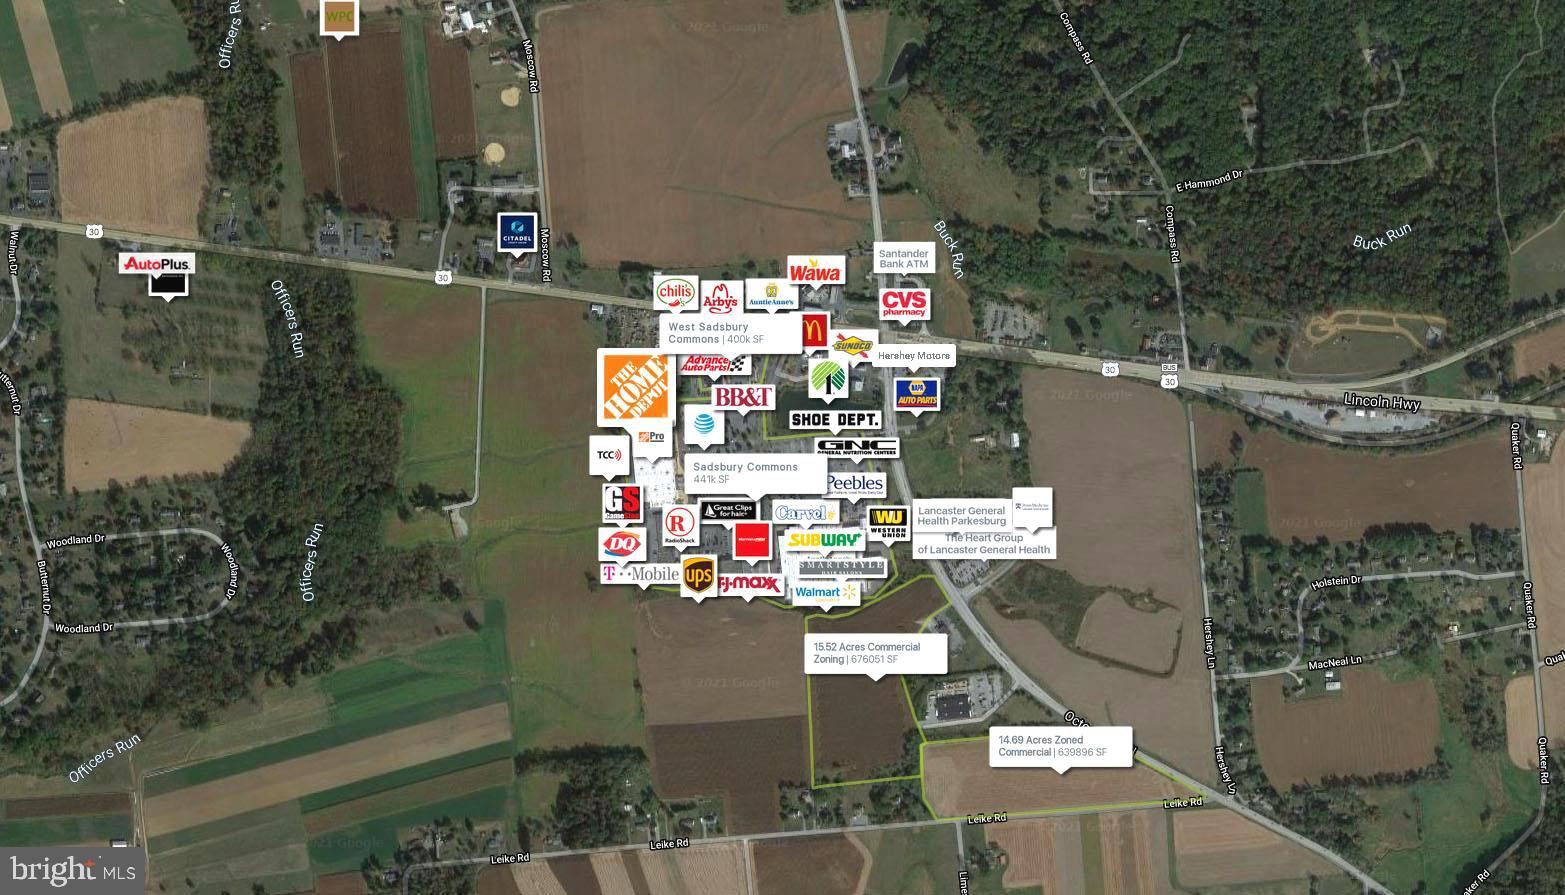 14.69  Commercially Zoned Land for Sale just off PA10S in Parkesburg. Attractively priced with combined AADT of over 50,000 cars per day! Bring your plans, your vision, your developer. C2 Zoning. Public Sewer and Water are available to this location.  See Sadsbury Township zoning office for approved uses.